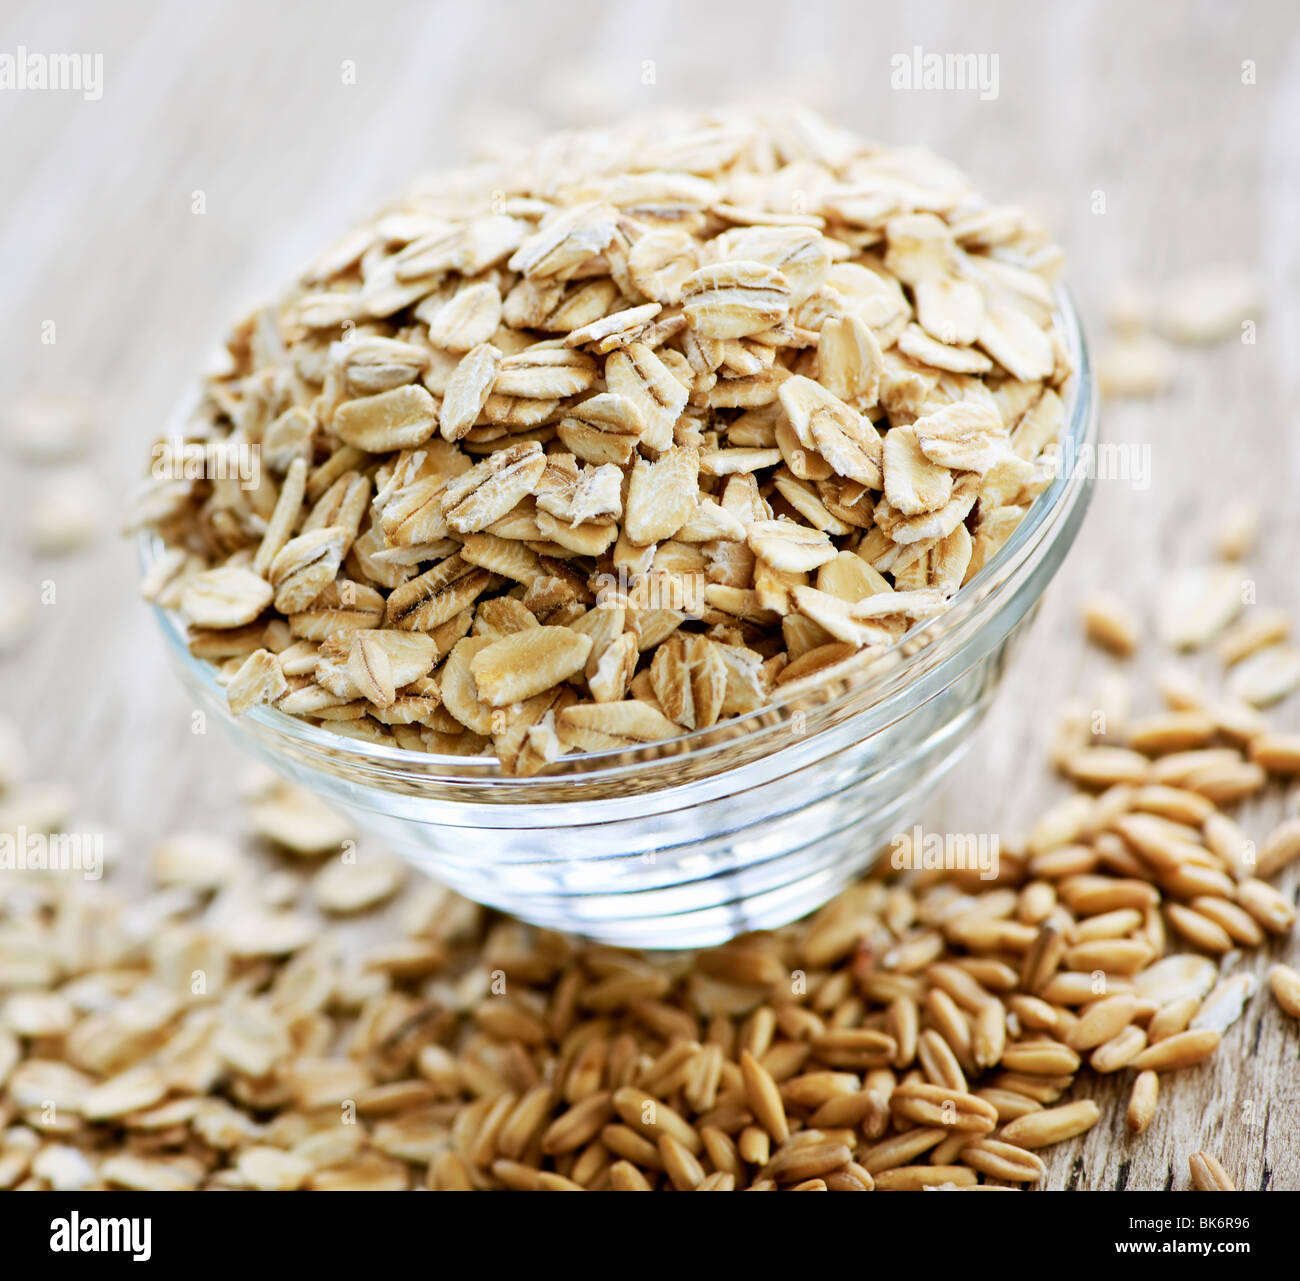 Nutritious rolled oats heaped in a glass bowl Stock Photo - Alamy